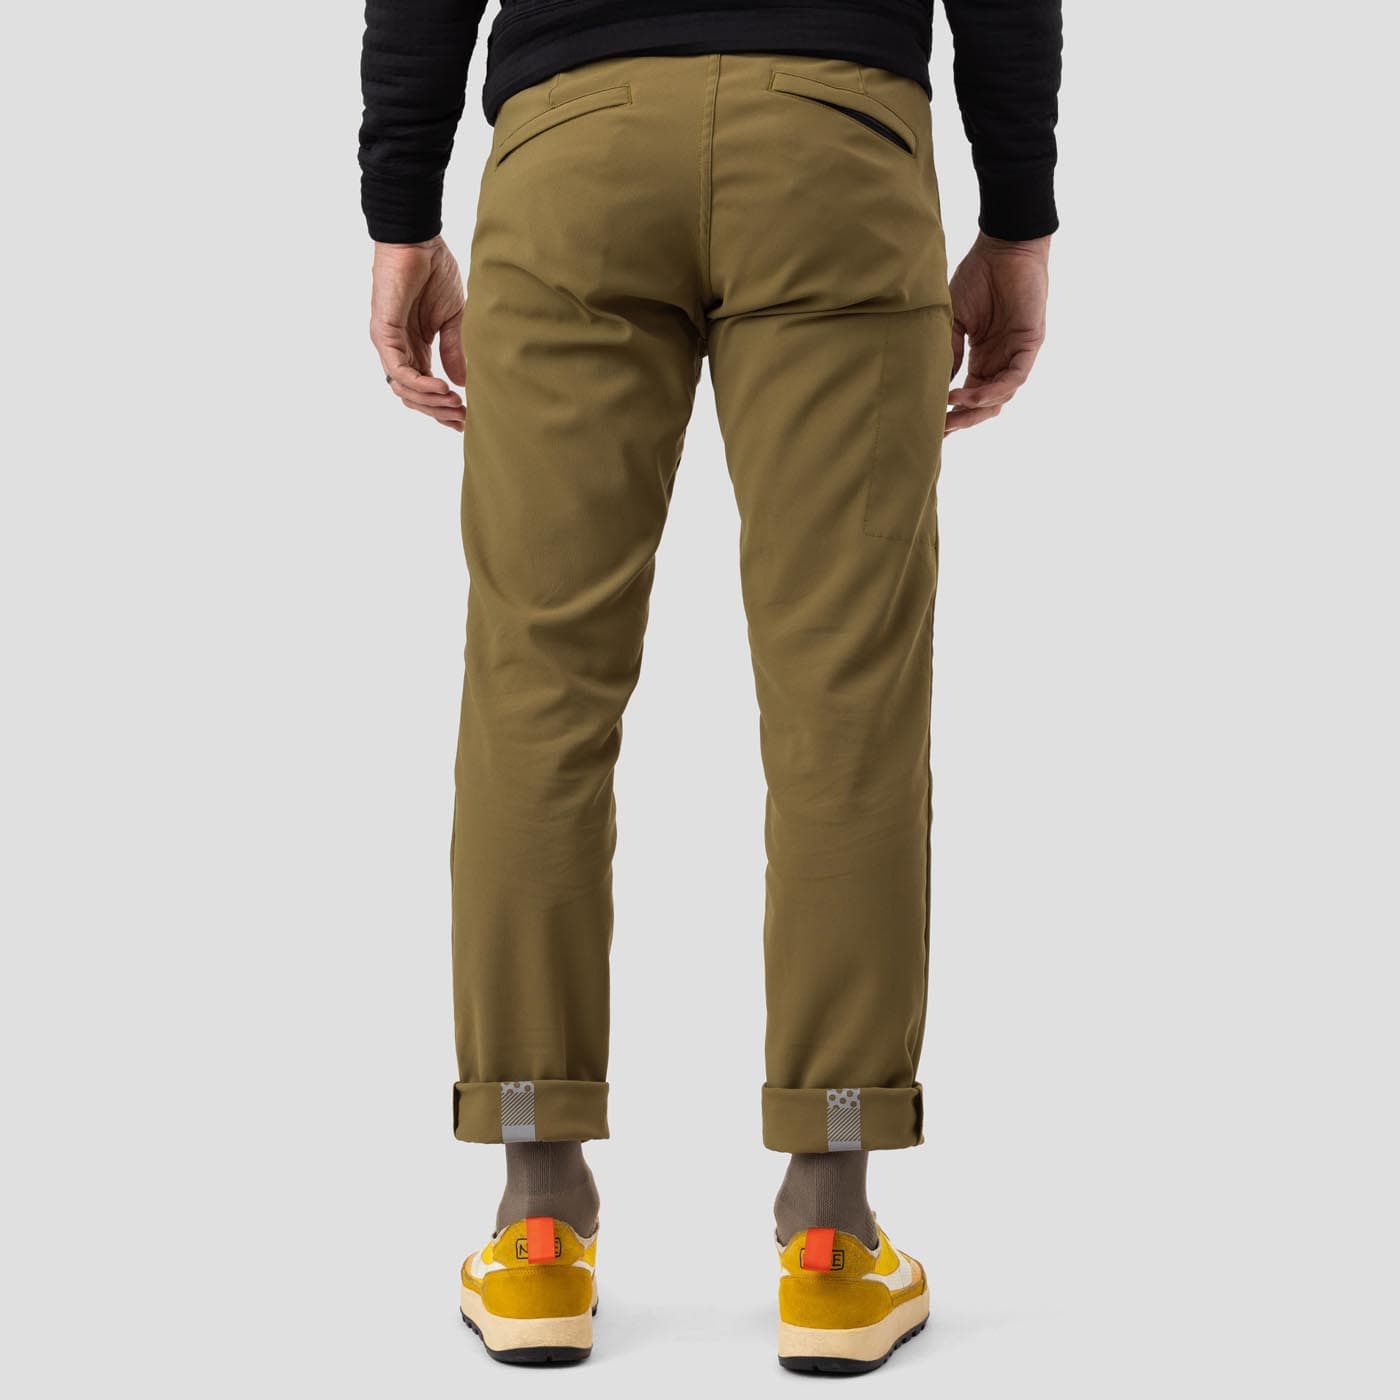 Buy Brown Trousers & Pants for Men by THE NOMHERD Online | Ajio.com